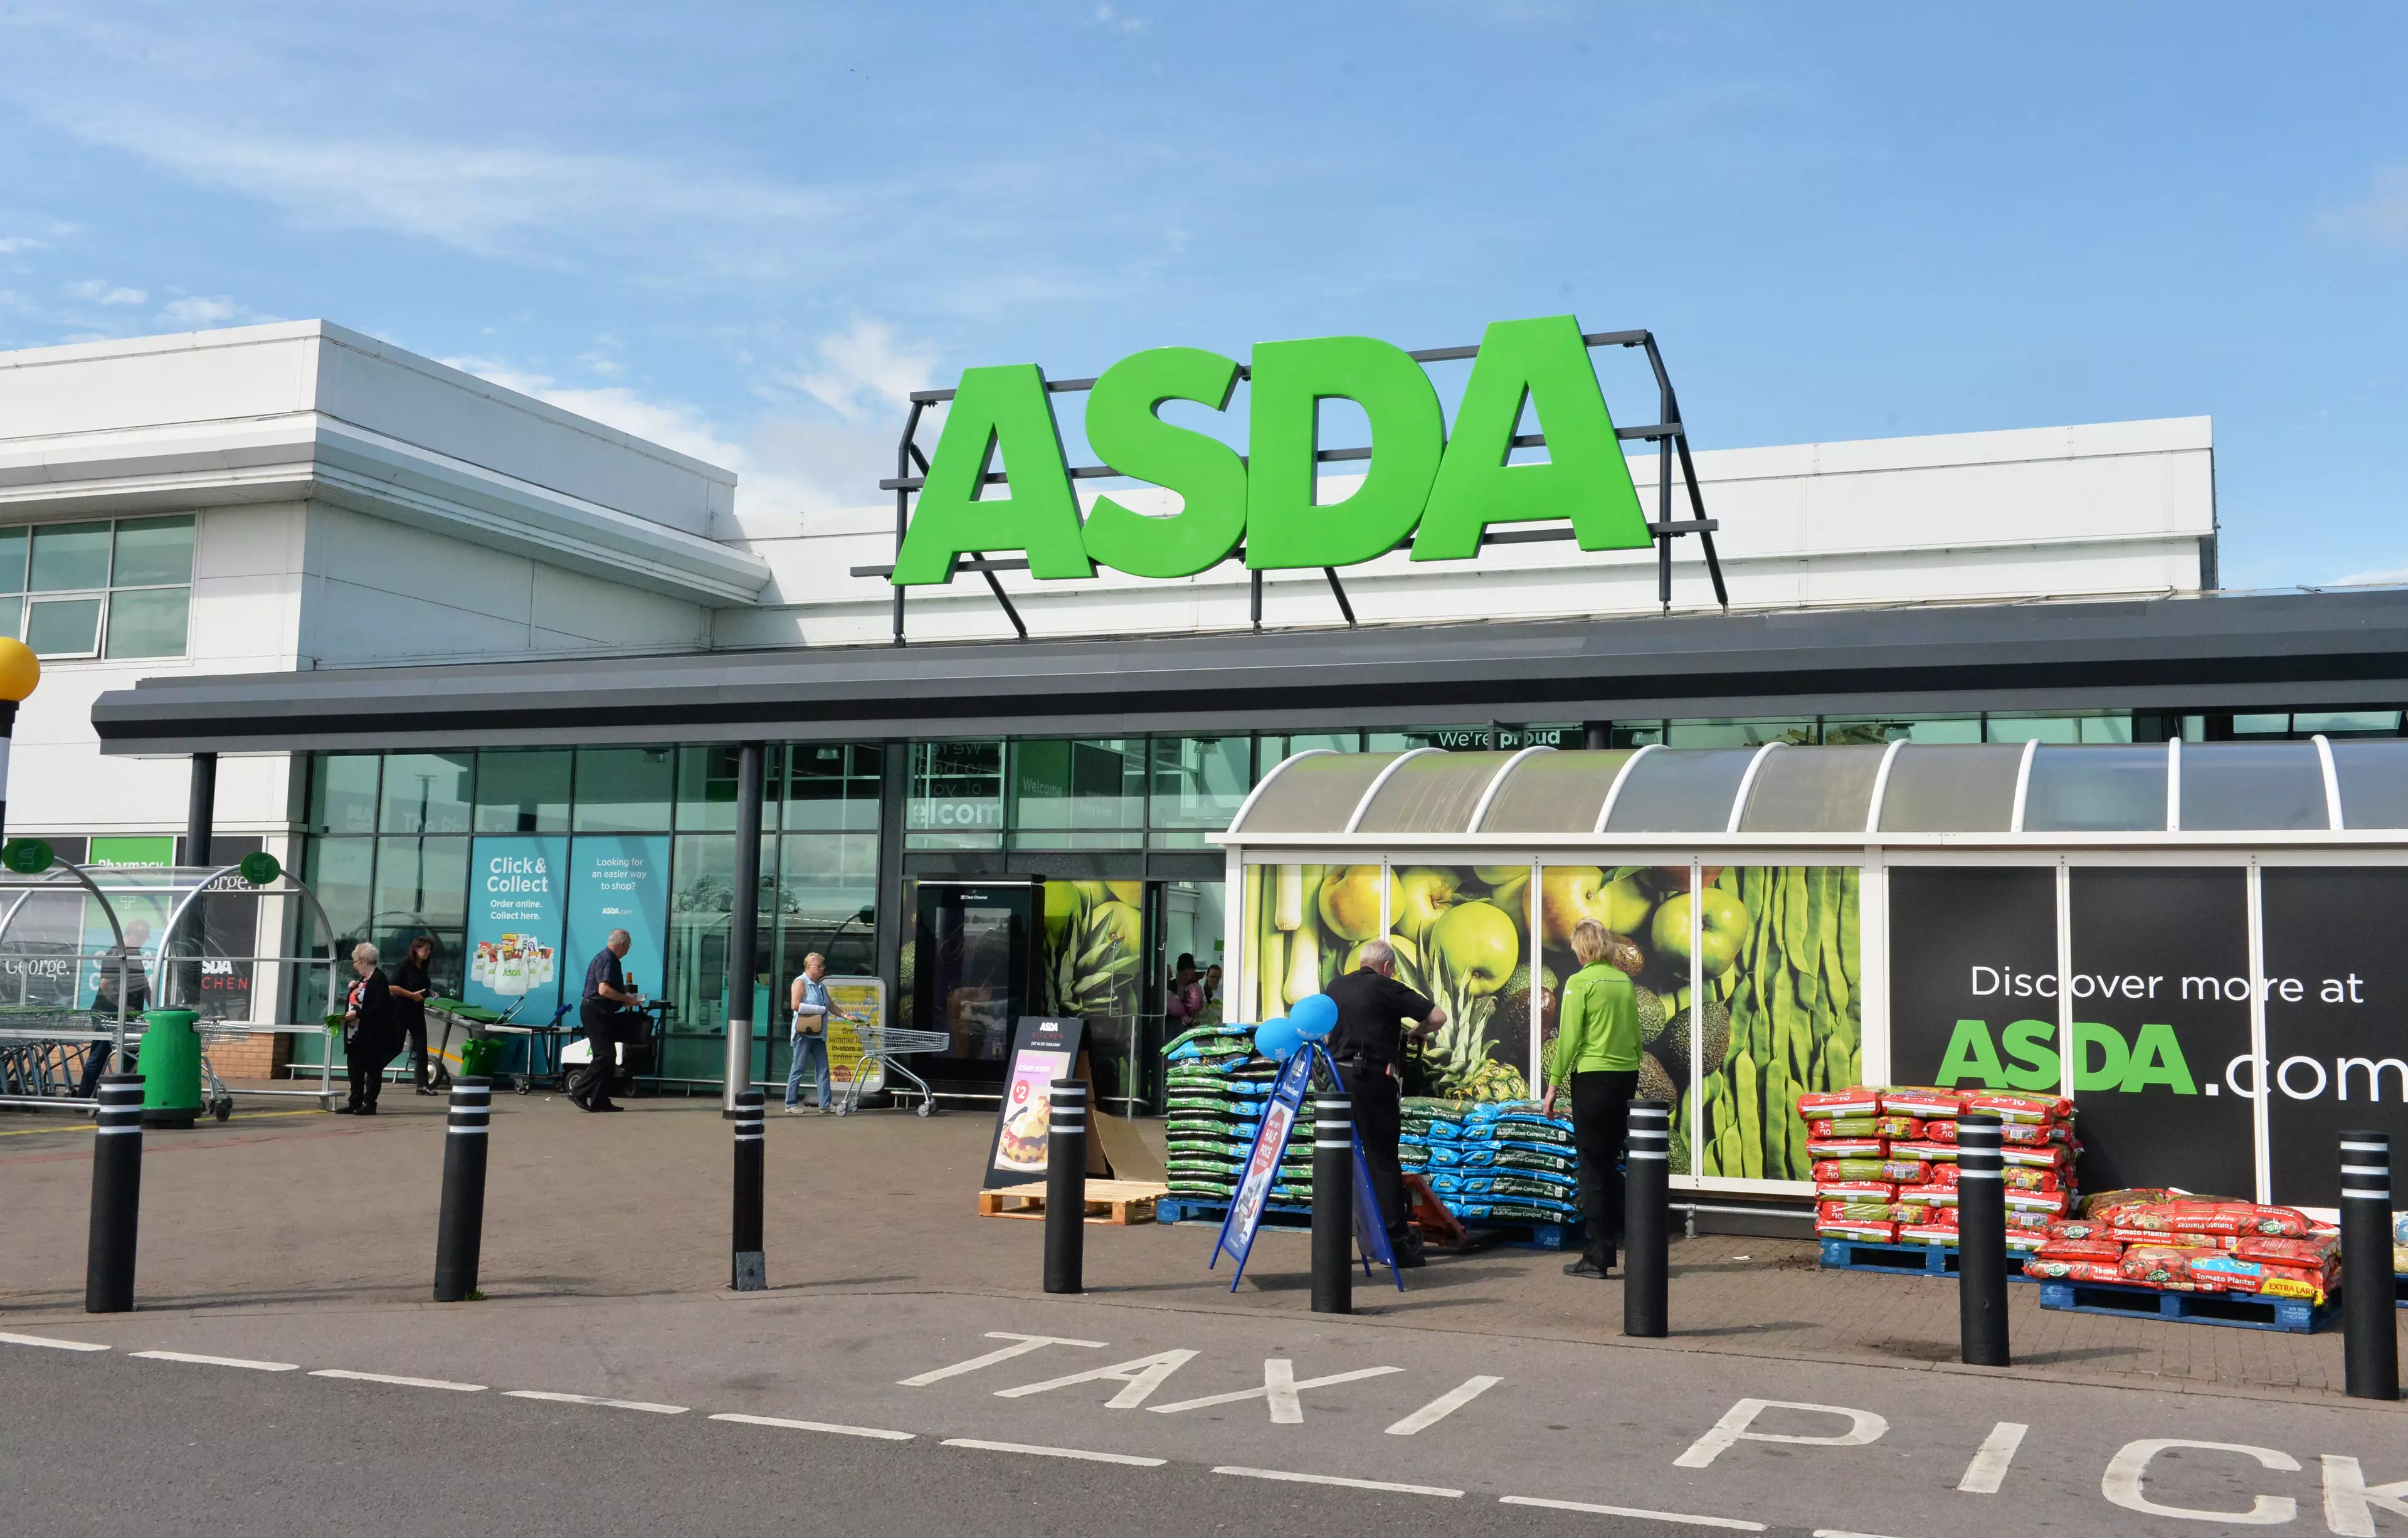 The ASDA store he was banned from.